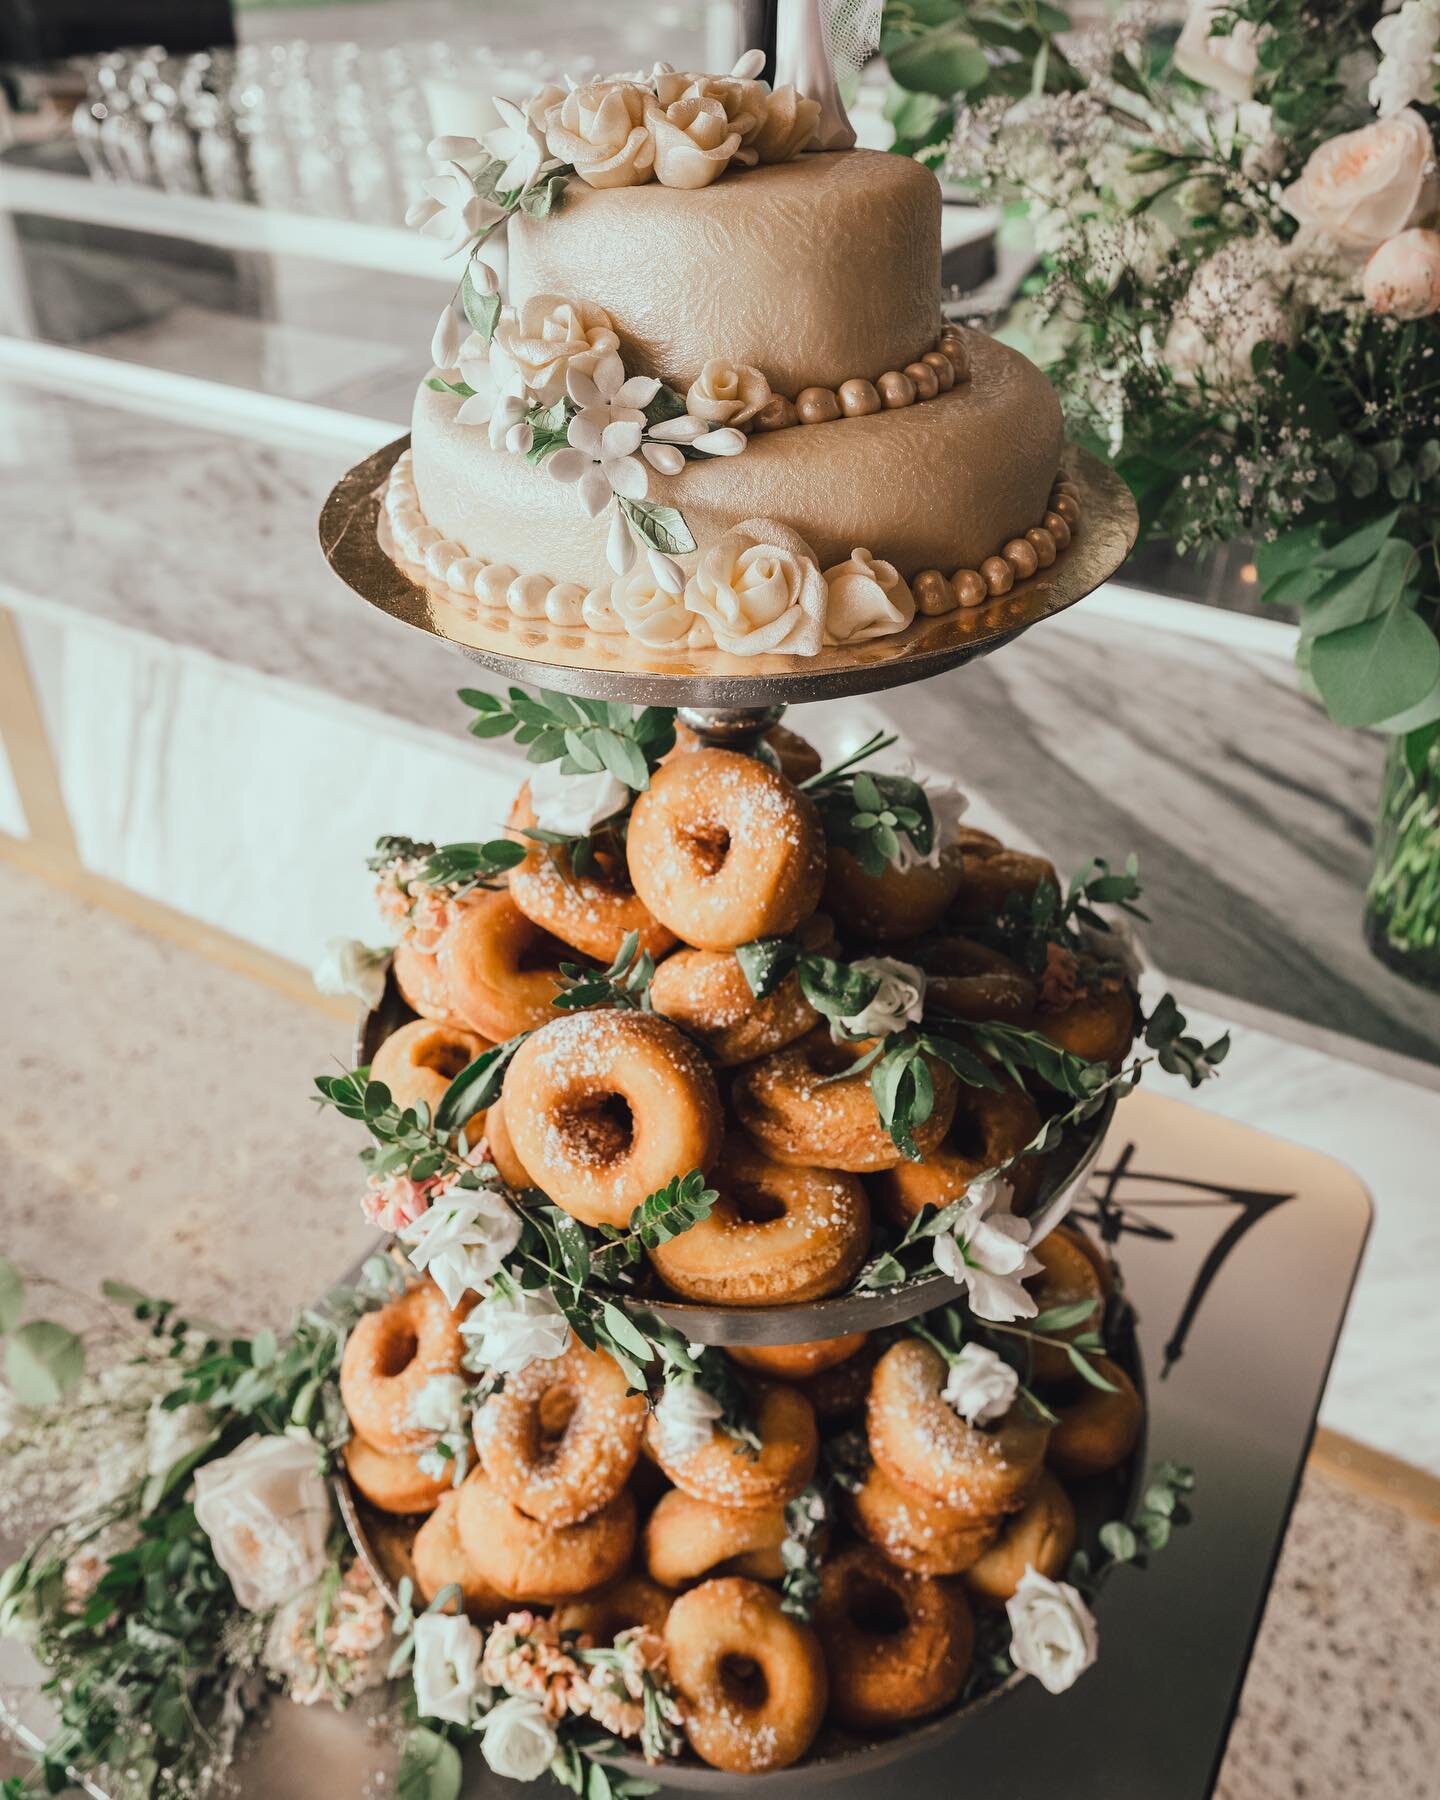 Homemade donuts cake! What more can you ask for 🤩